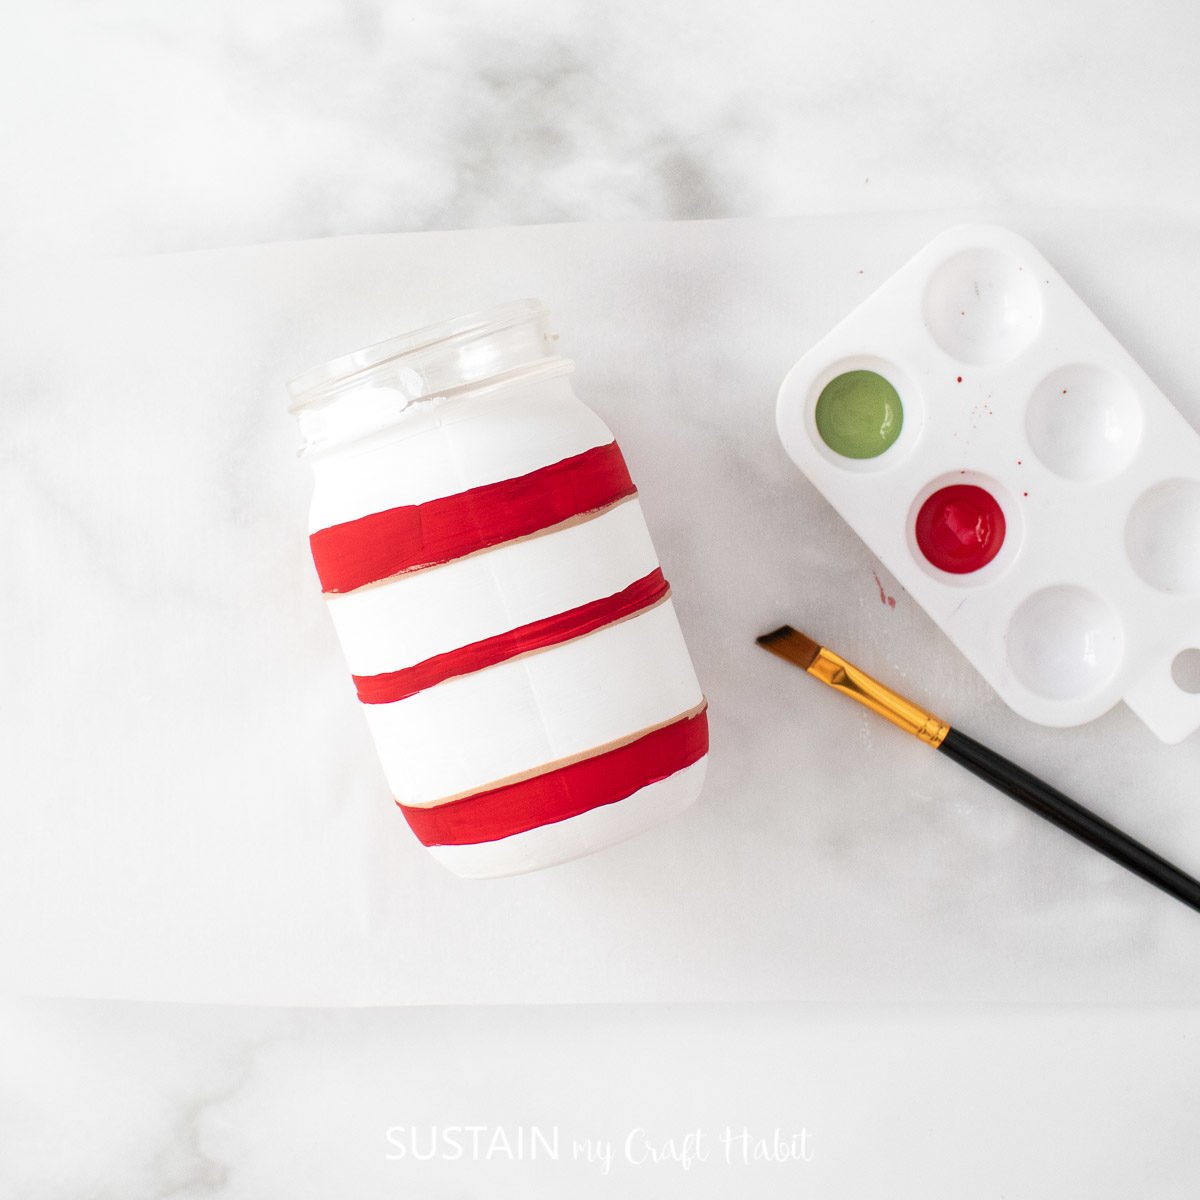 Painting red horizontal lines on the mason jar.